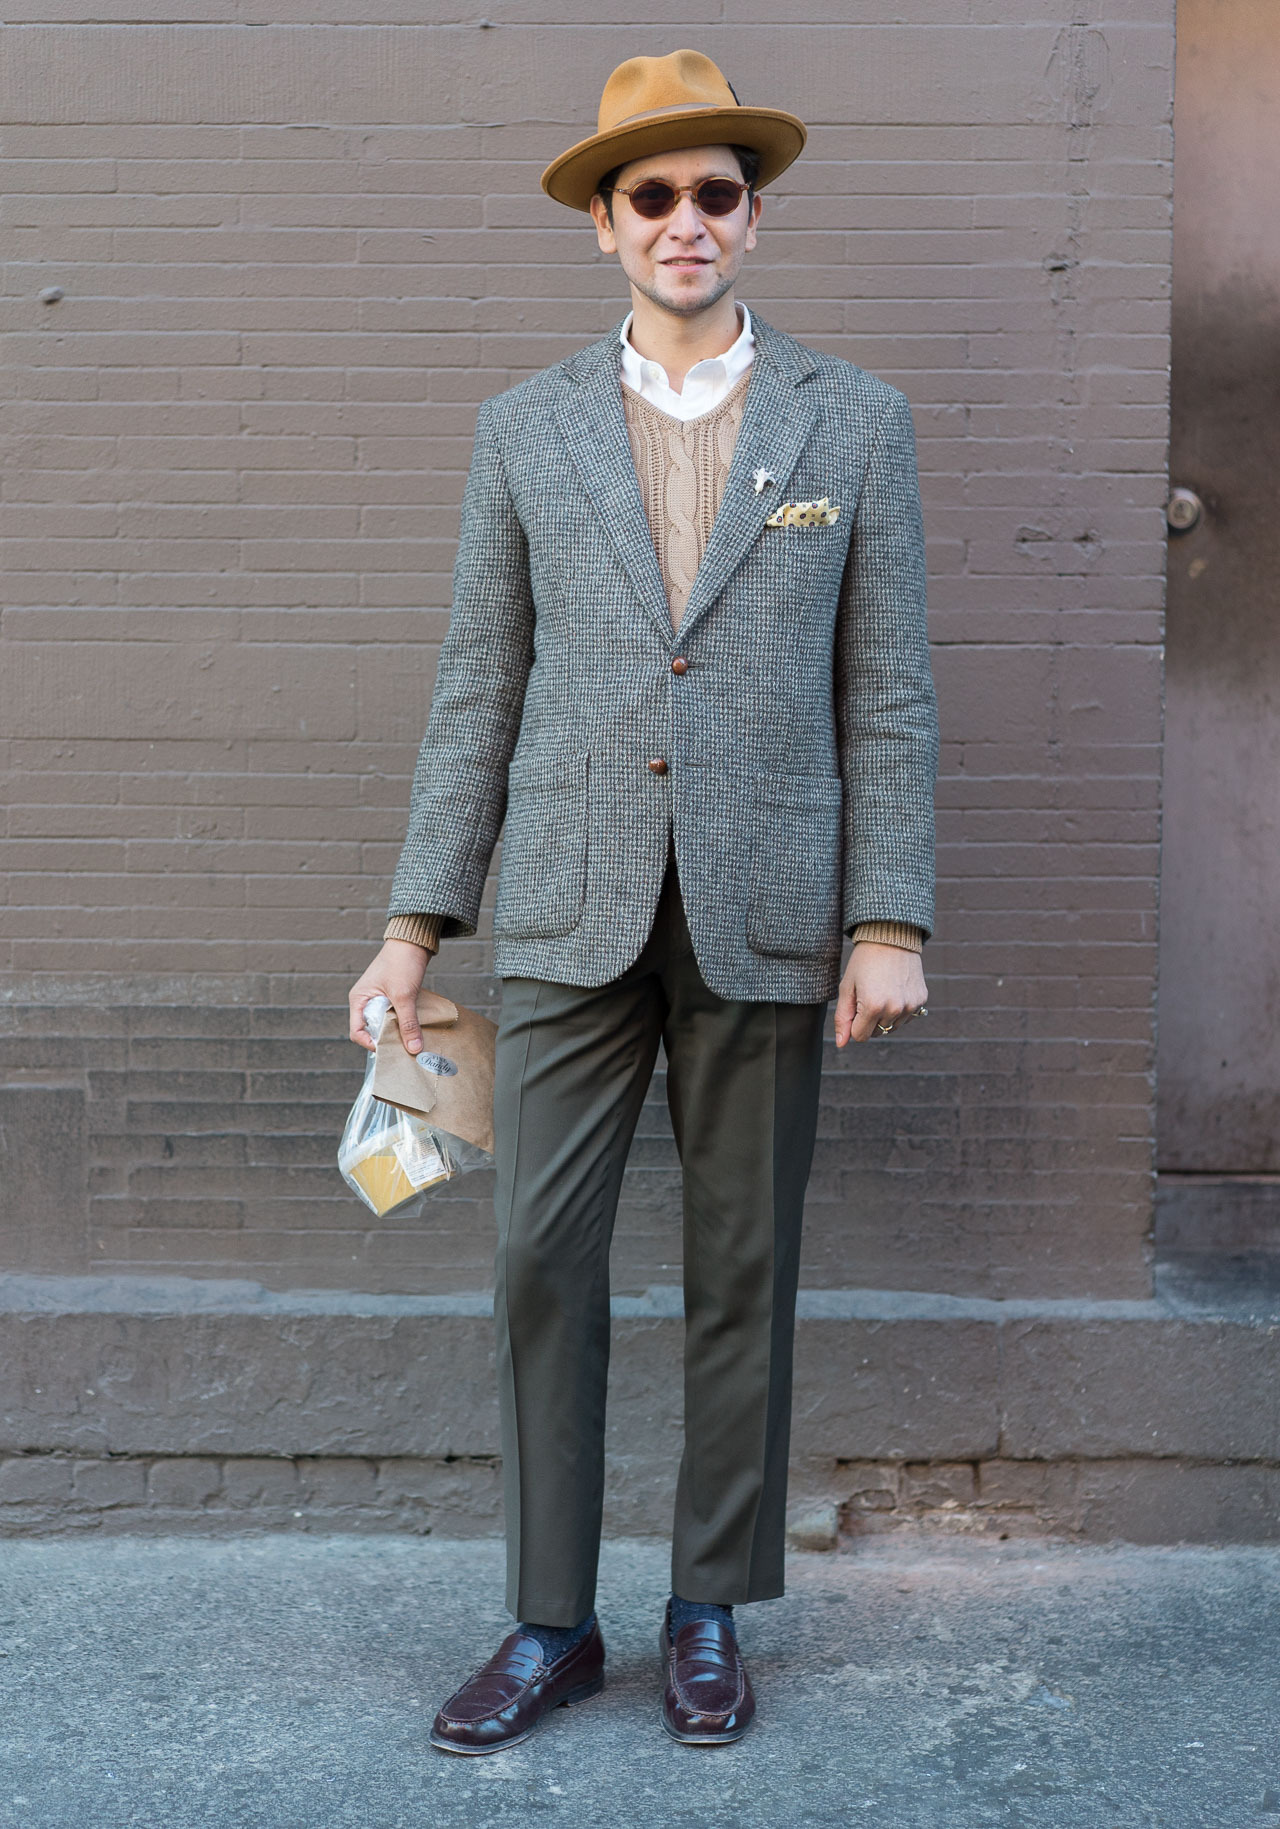 NYC Looks — Eli, 30 “The regalia is made of a wool sports coat...